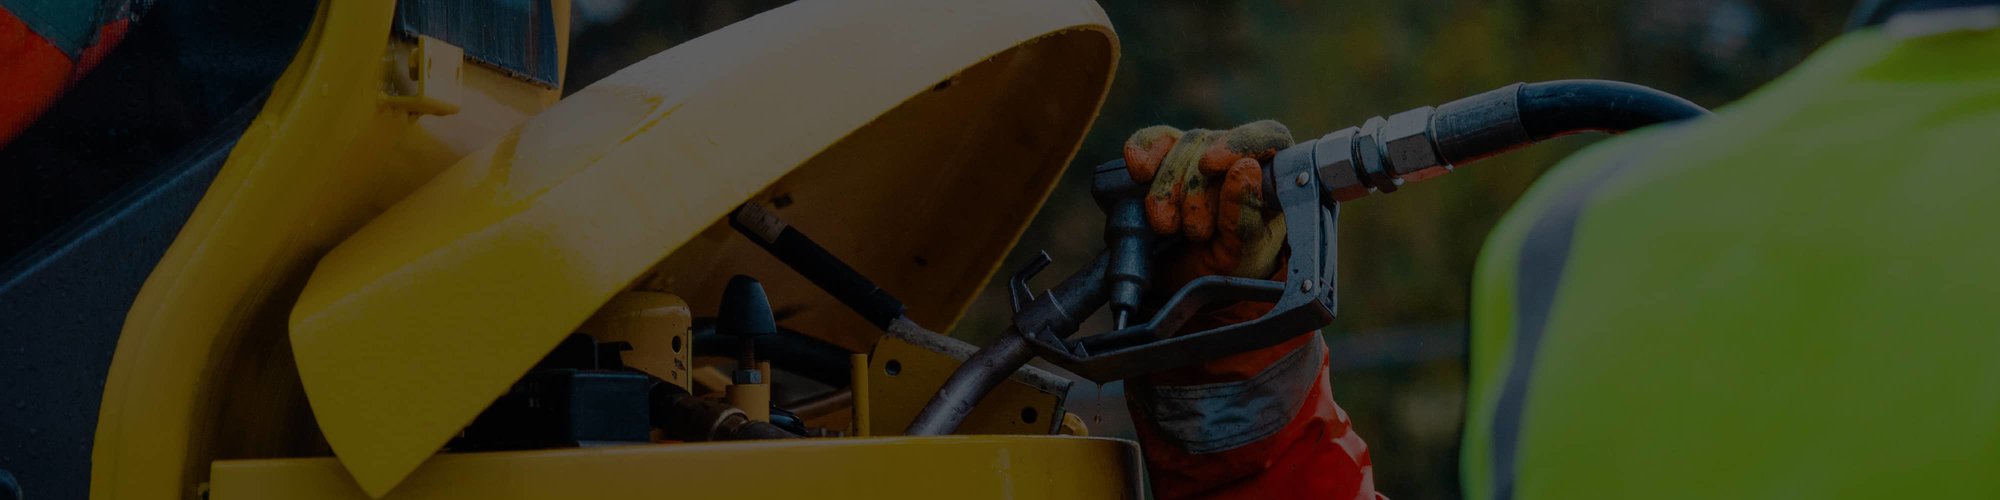 A technician wearing an orange glove and adding fuel to a piece of heavy equipment